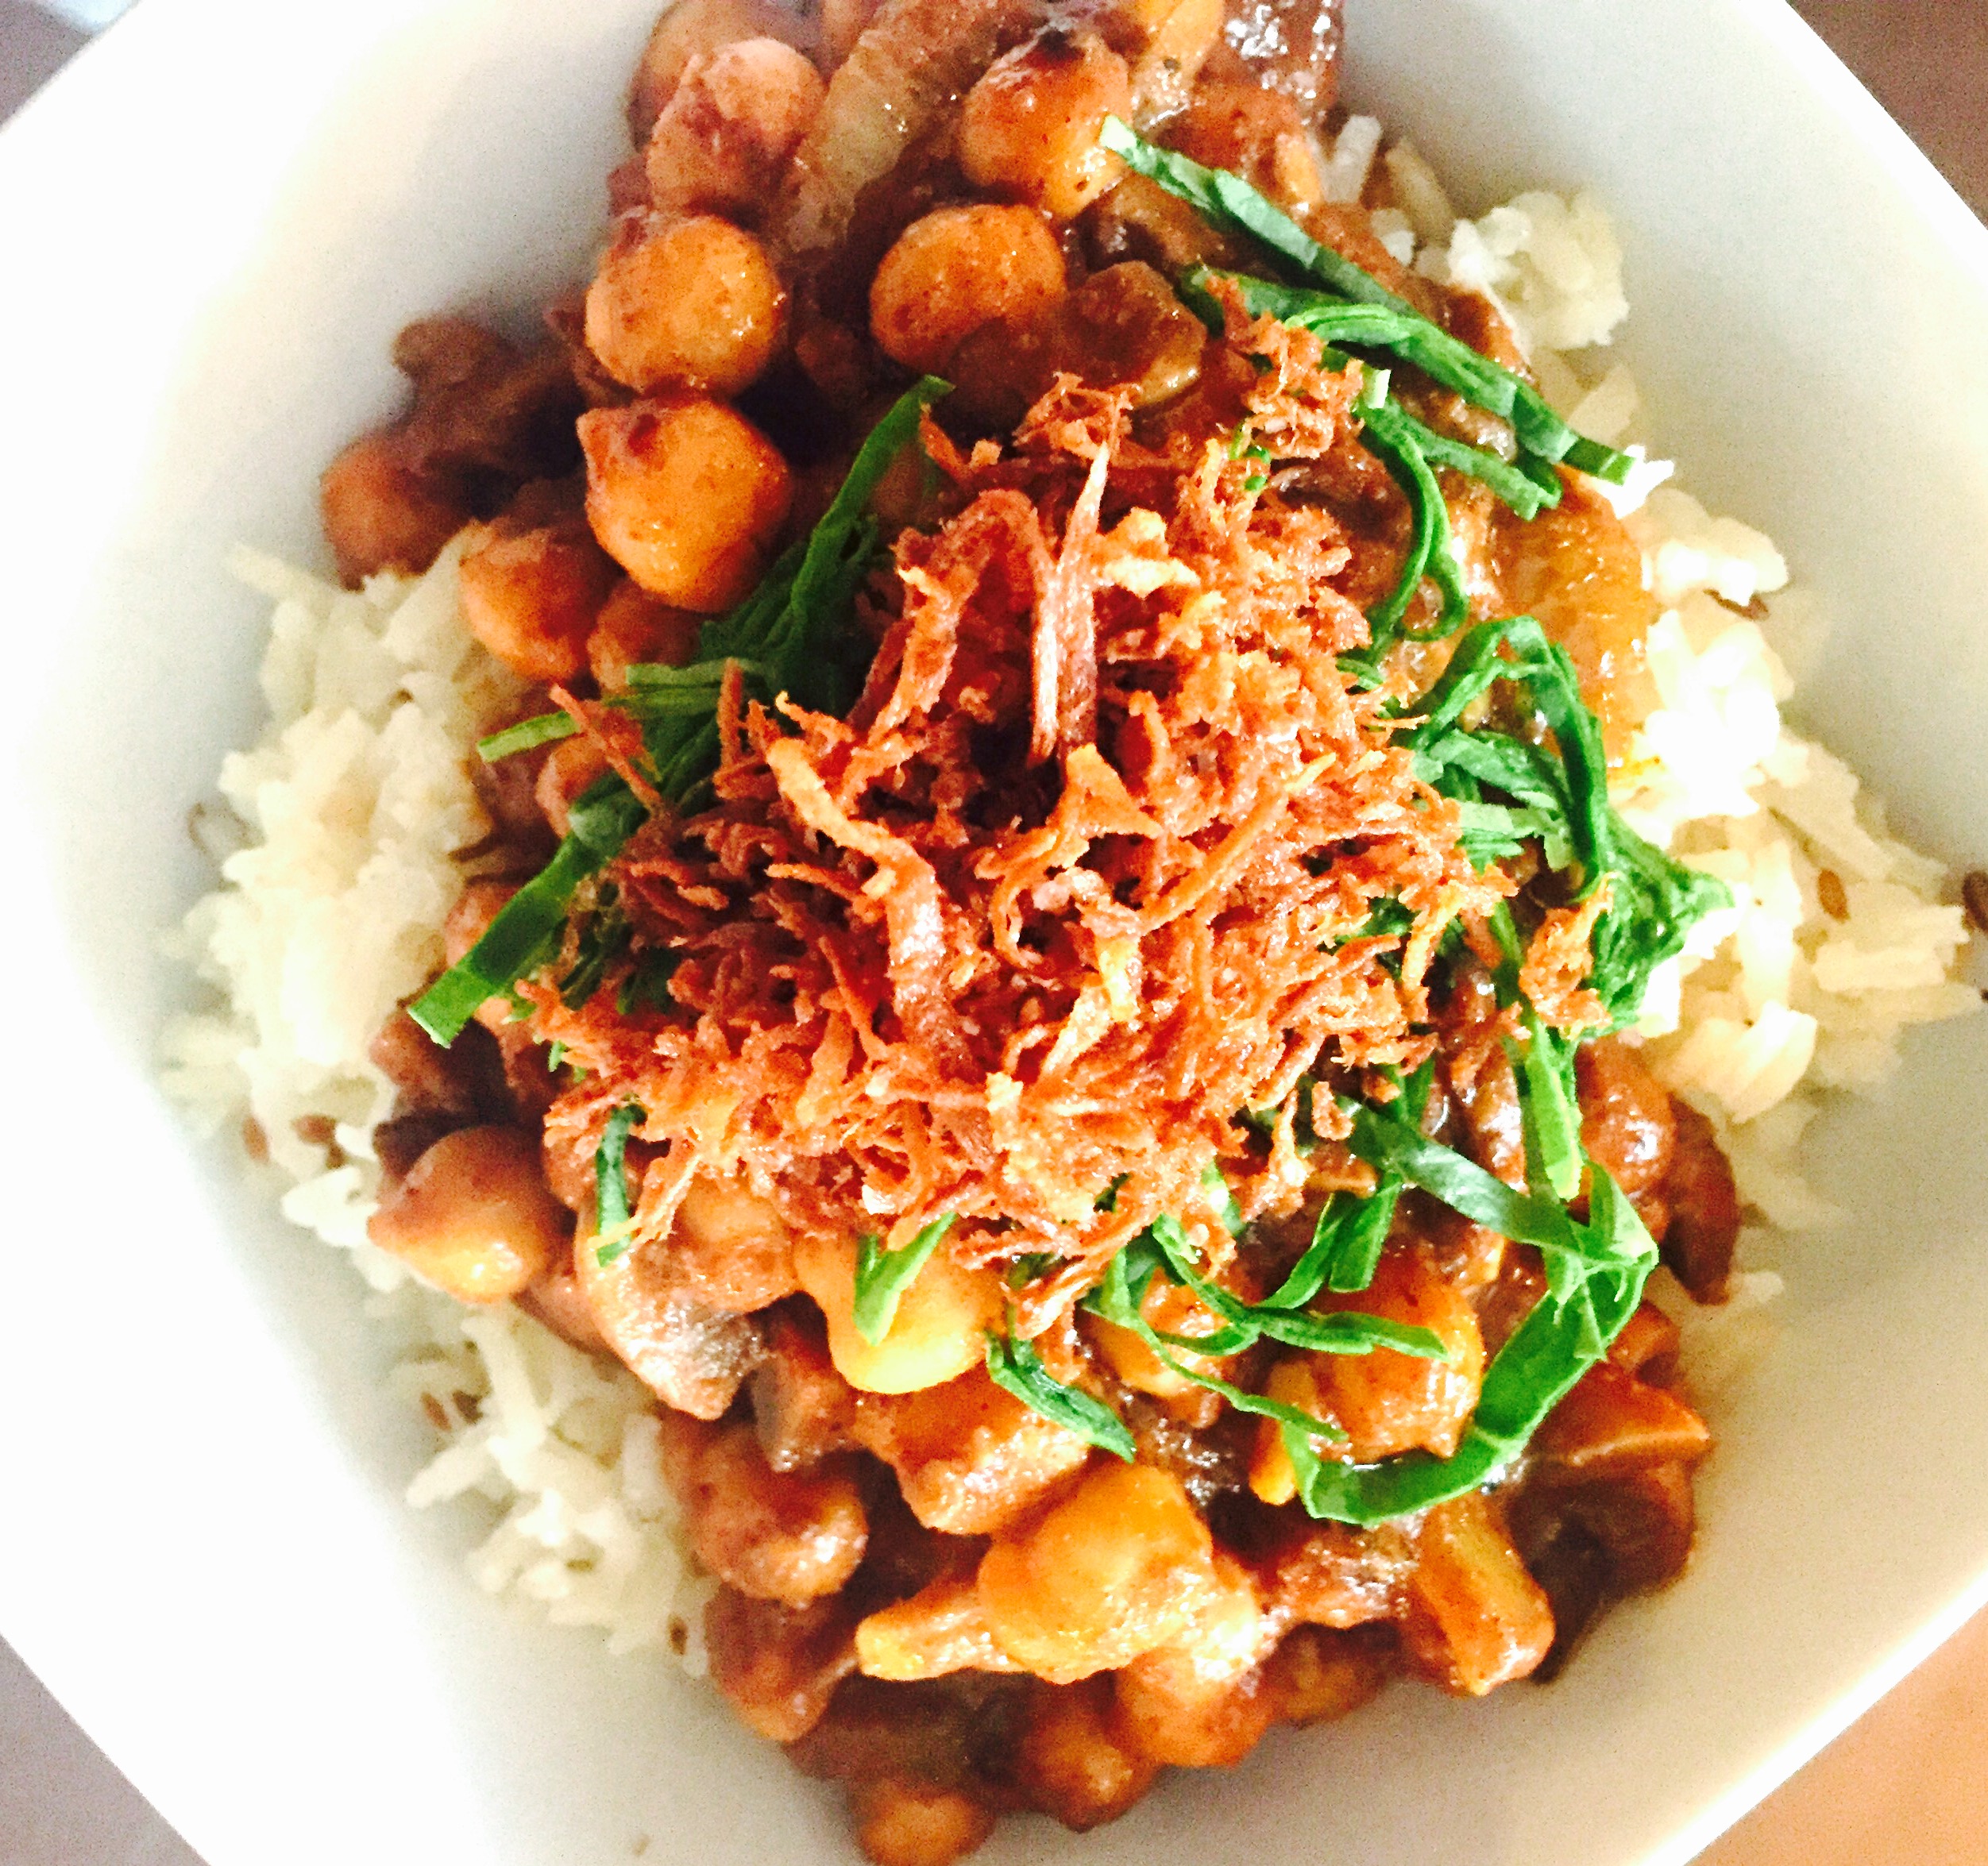 Savoury chana masala served on toasted cumin seed basmati with shredded baby spinach and deep fried grated parsnip